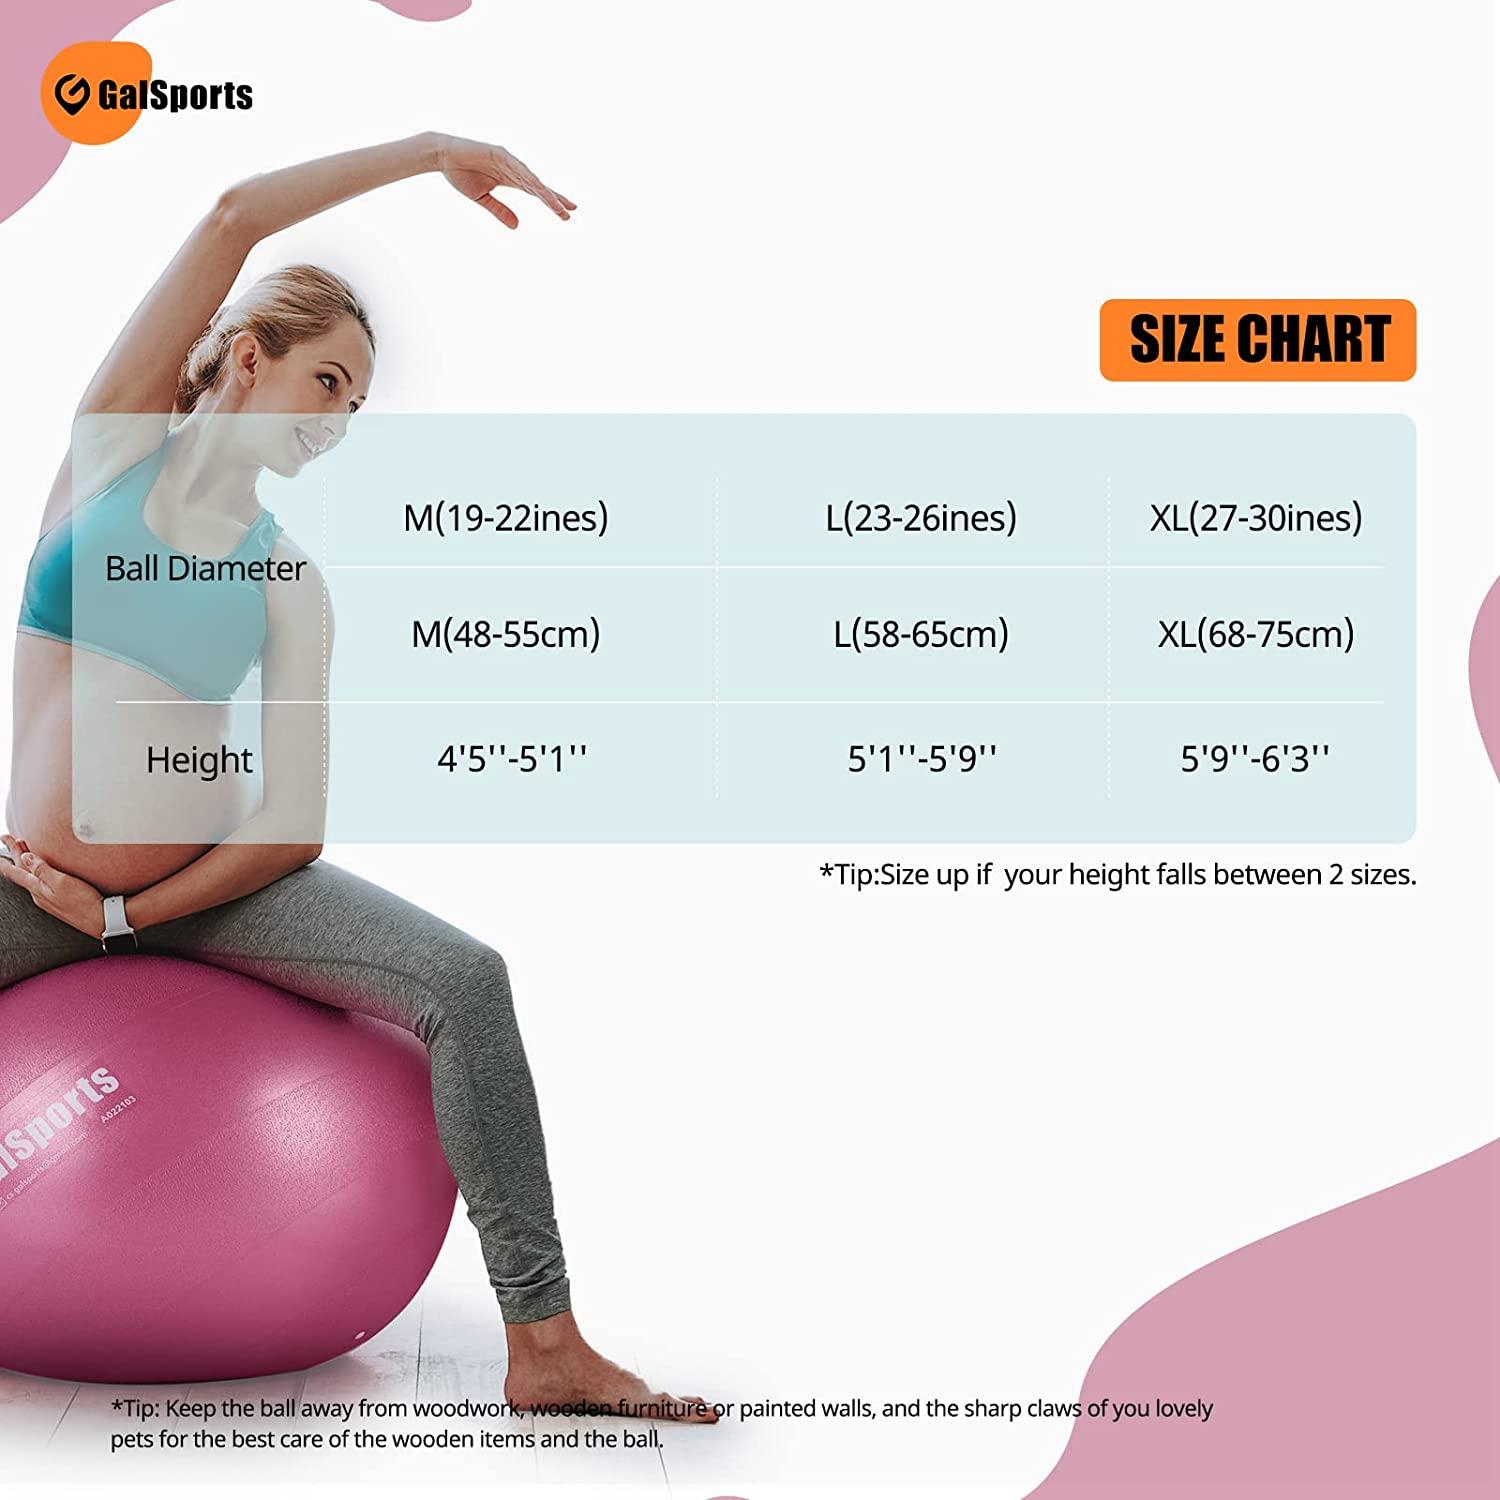 GalSports Pregnancy Ball - Birthing Ball for Workout Yoga Stability,  Pregnancy Safety Materials for Maternity Physio & Recovery Plan Included,  Labor Exercise Ball with Quick Pump Rose Red L (58-65cm)